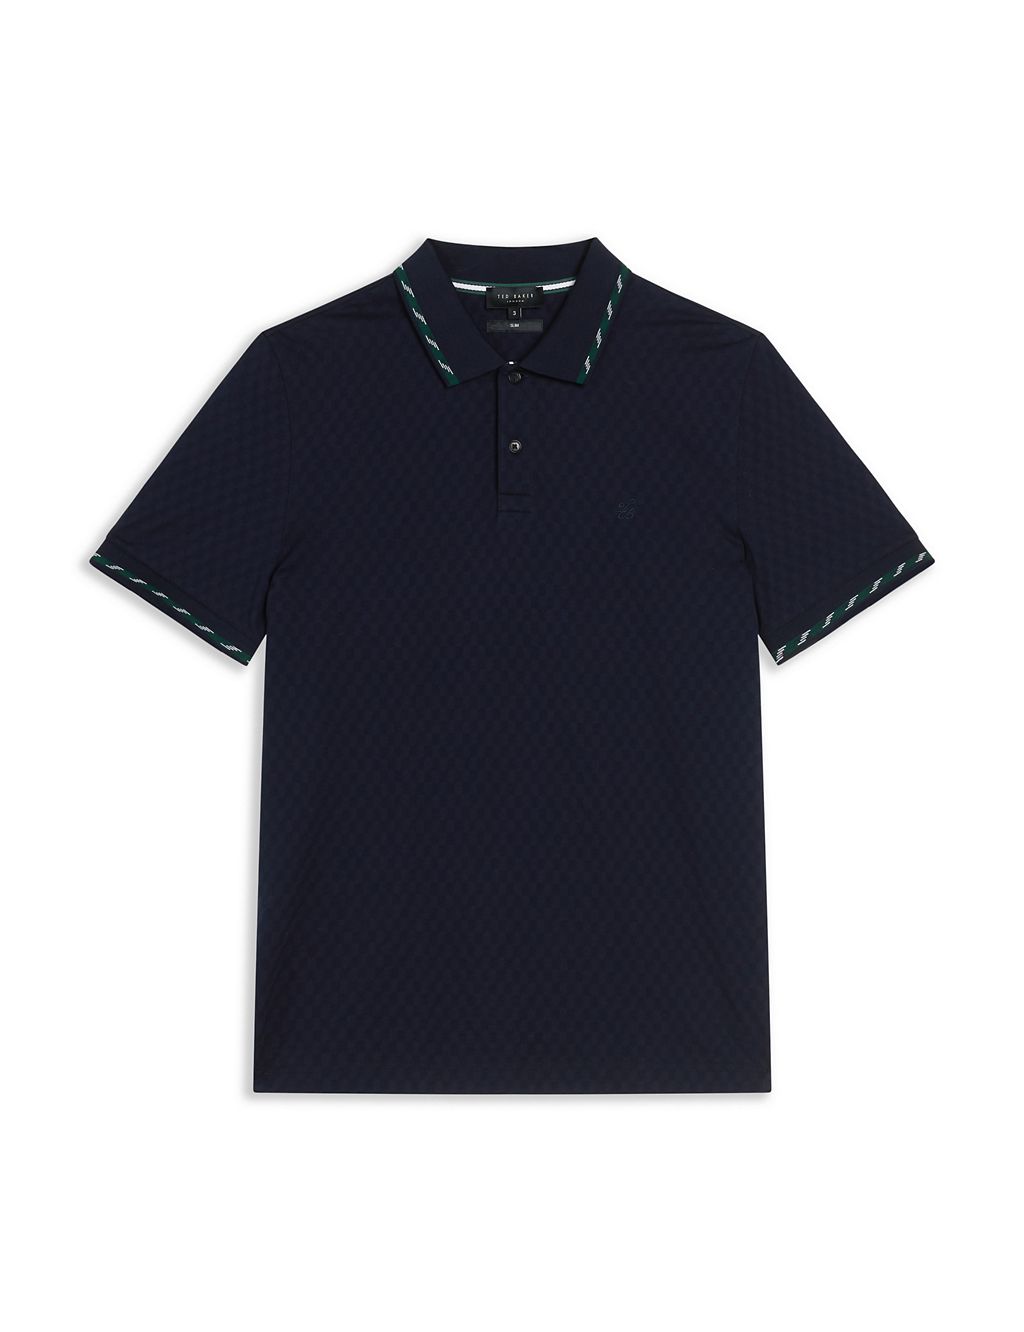 Slim Fit Pure Cotton Tipped Polo Shirt | Ted Baker | M&S